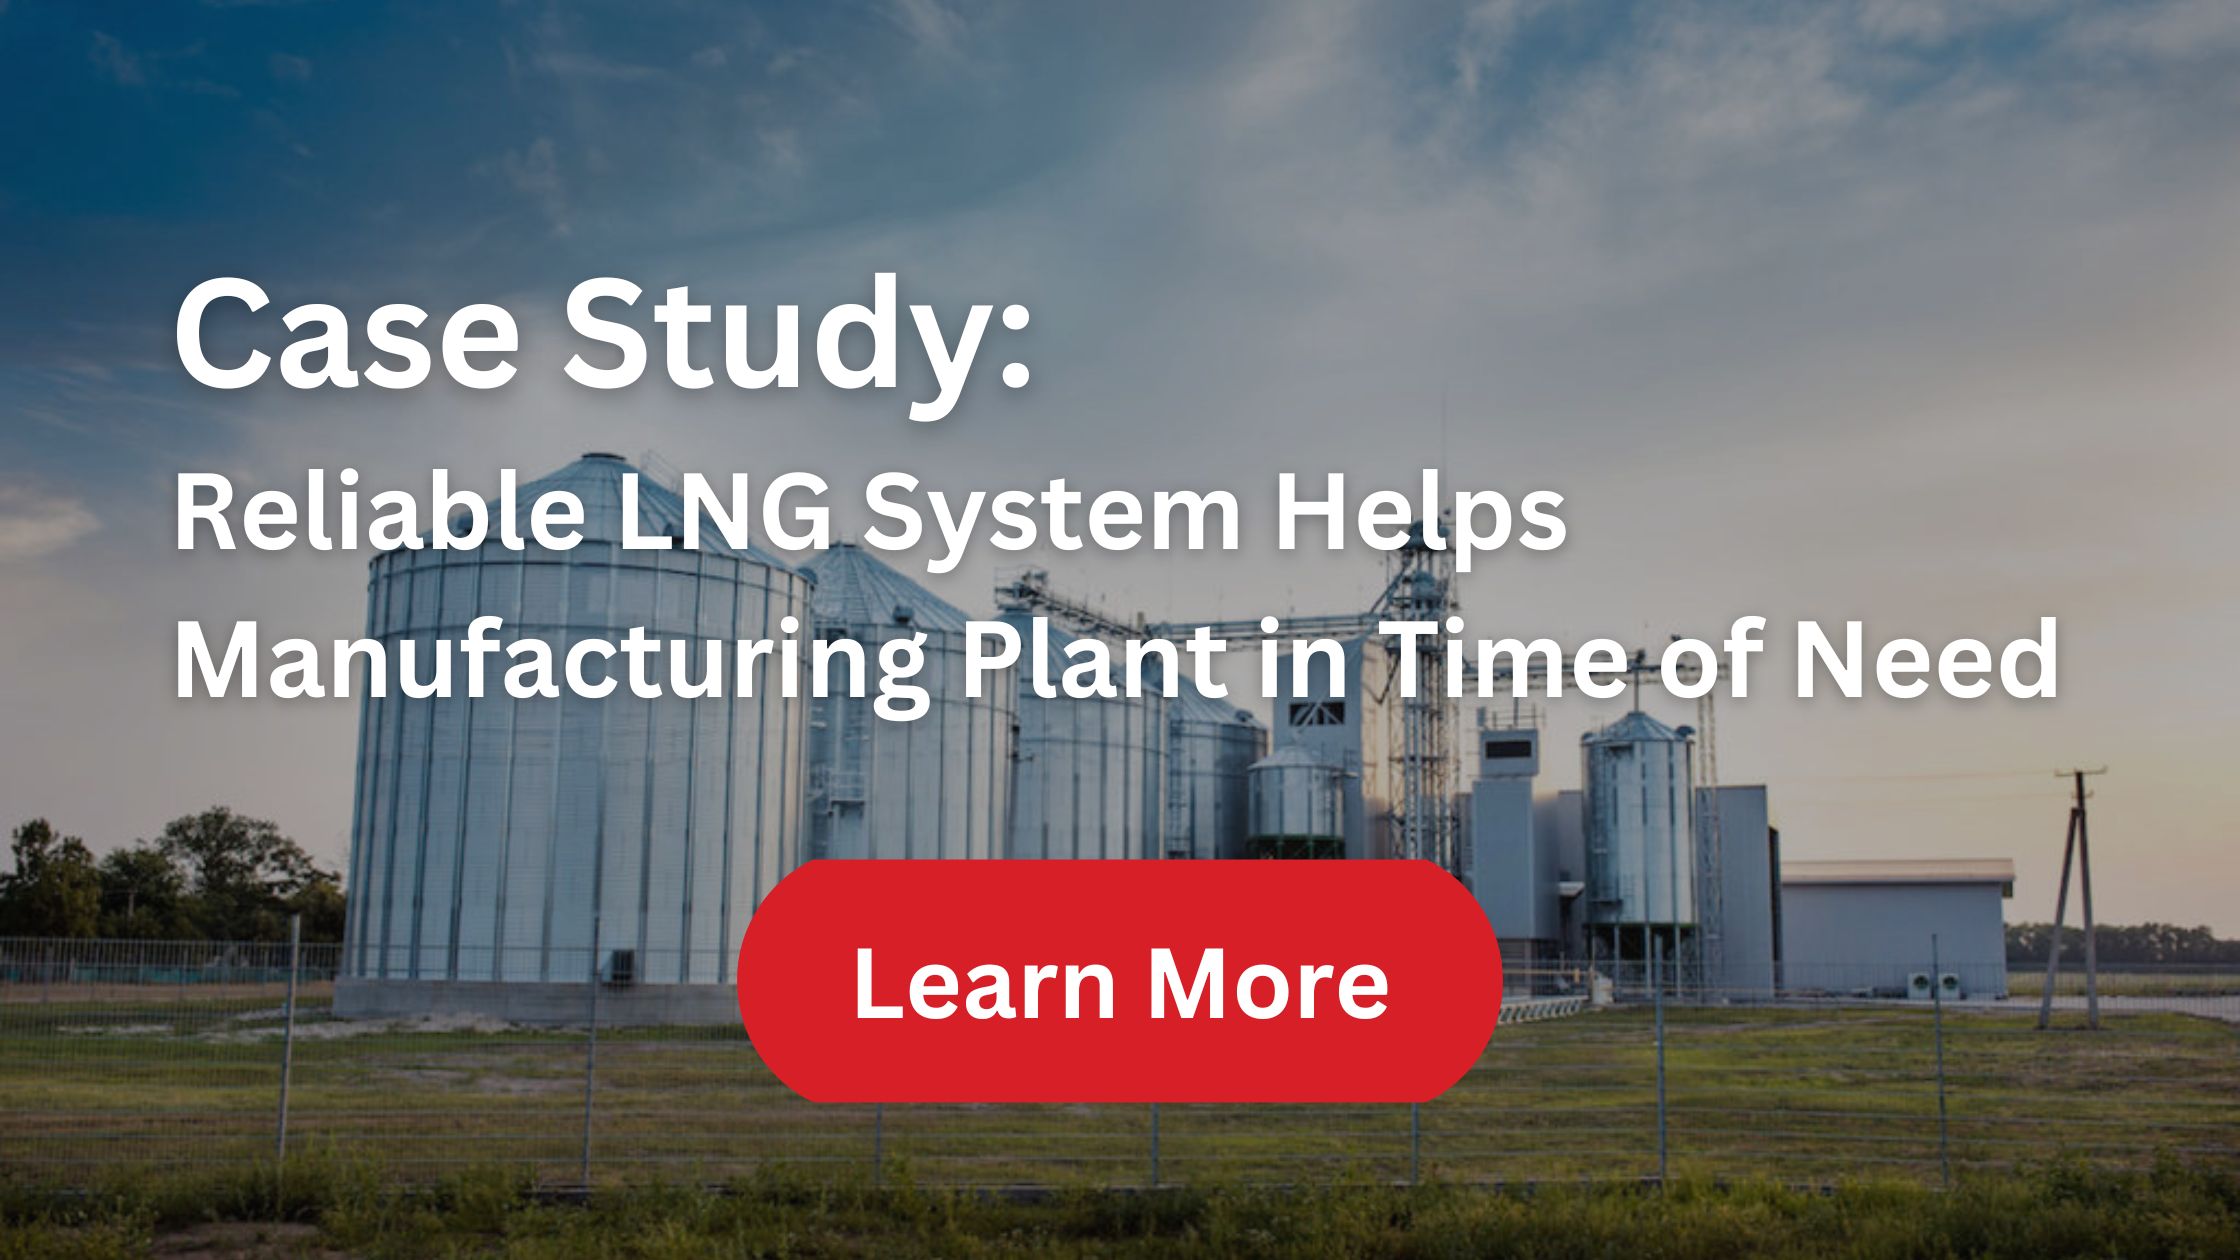 LNG-Business-Continuity-Resiliency-Blog-Manufacturing-Banner.jpg